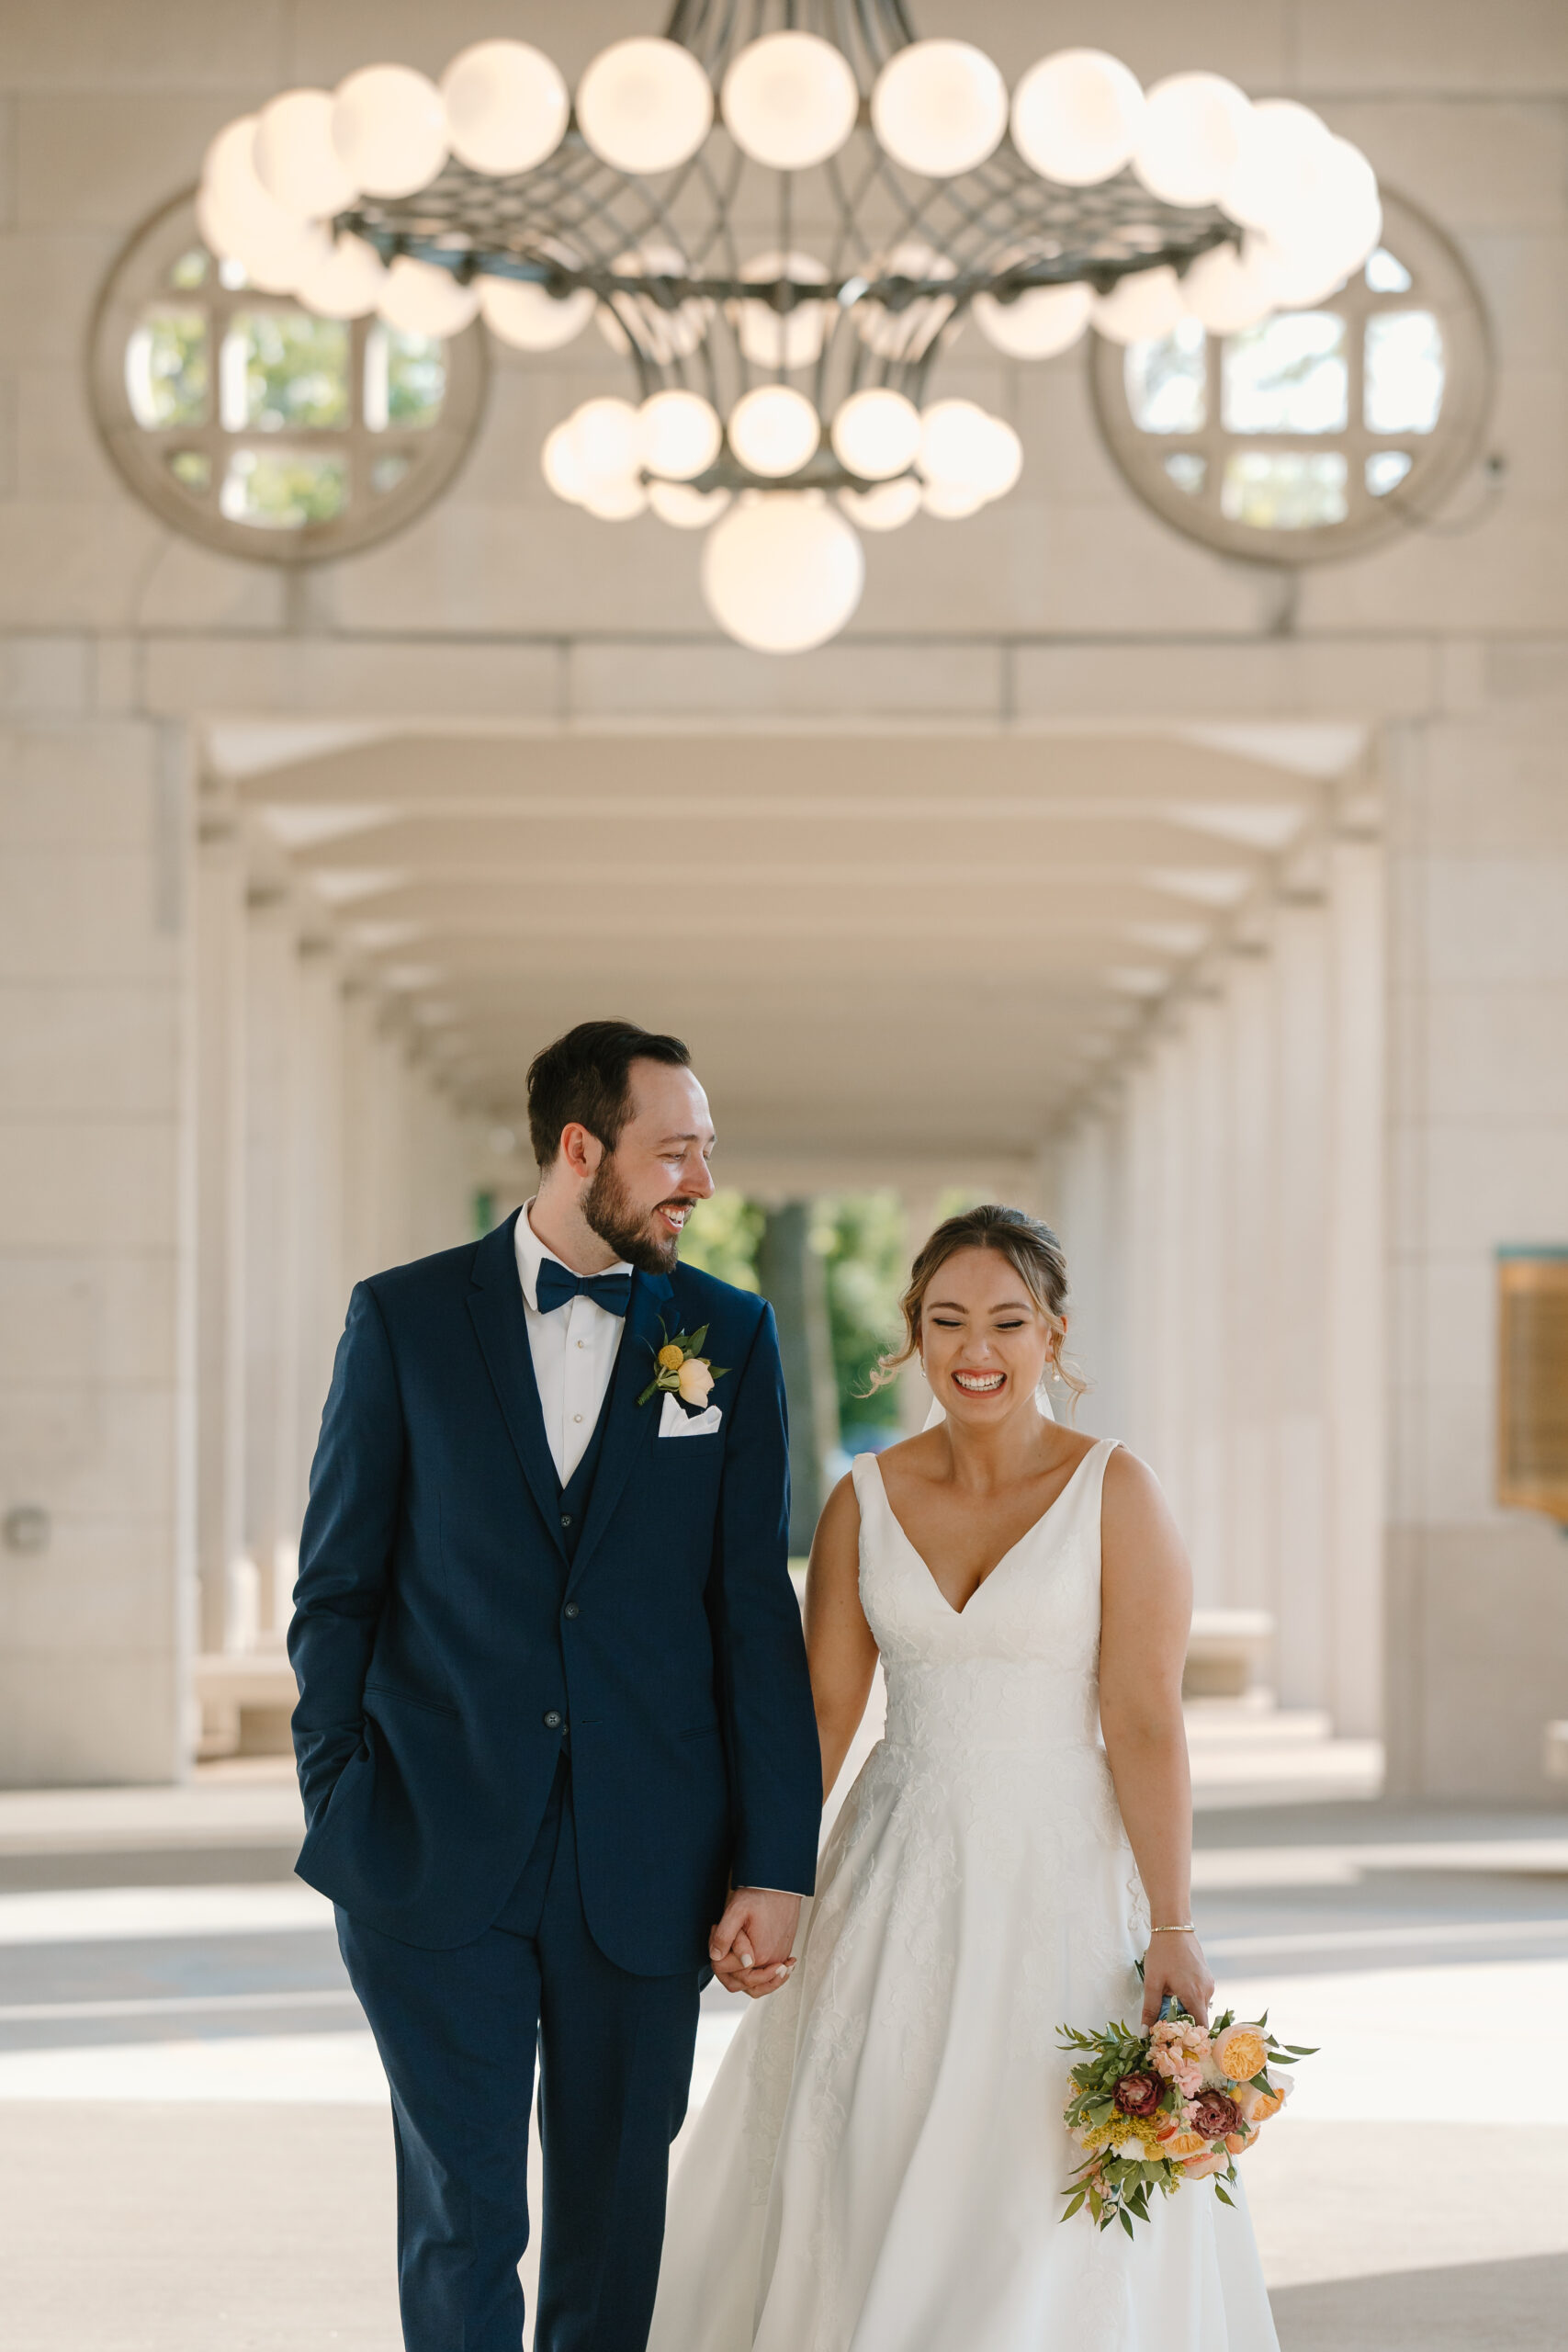 The Ultimate Guide to Supporting Your BFF On Their Wedding Day | Chicago Wedding Photographer